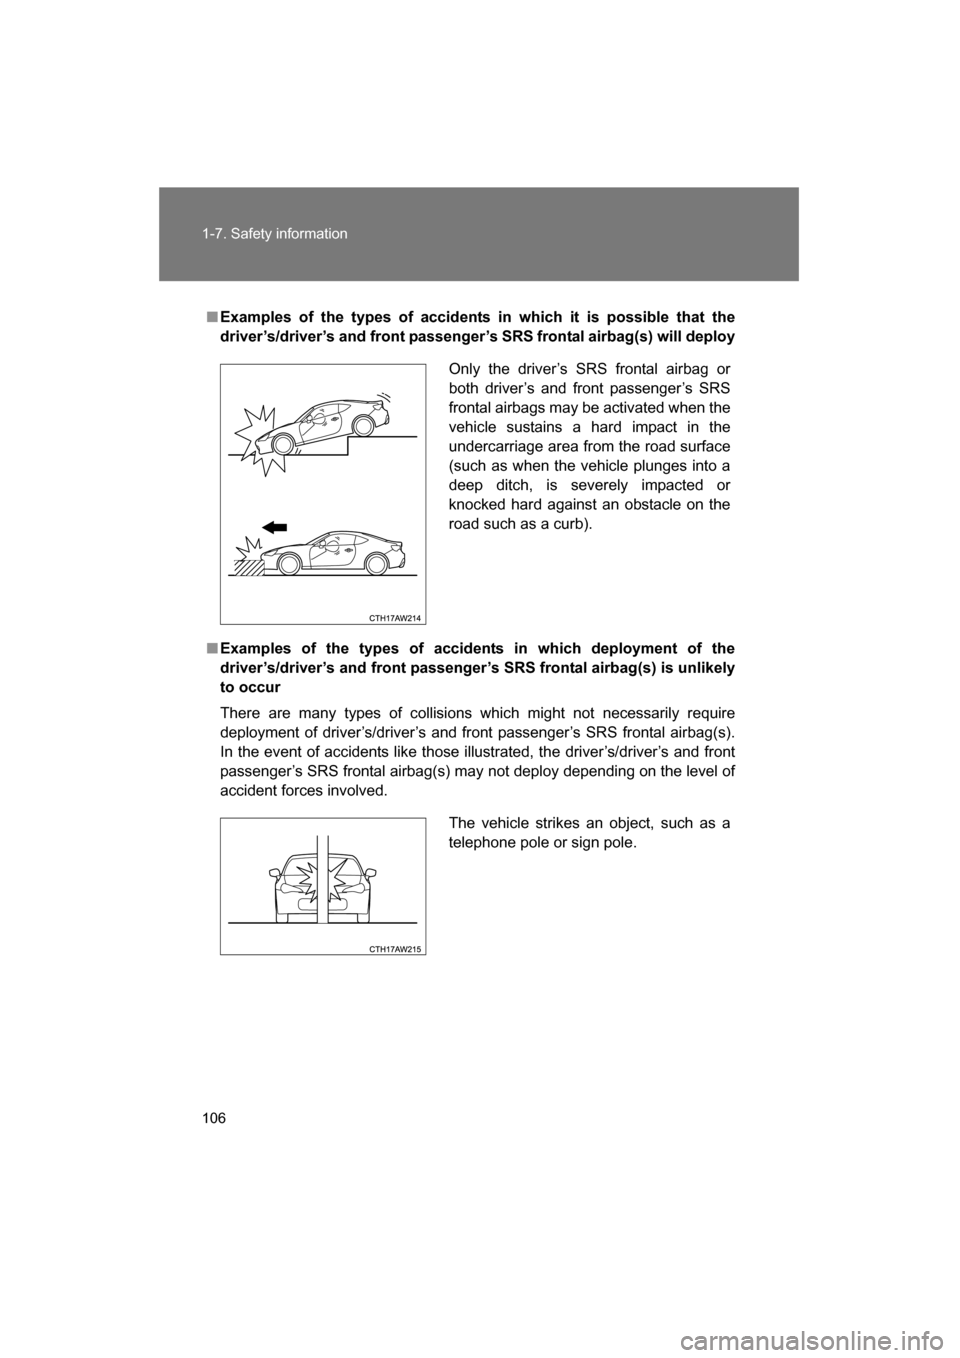 SUBARU BRZ 2015 1.G Owners Manual 106
1-7. Safety information
■Examples of the types of accidents in which it is possible that the 
driver’s/driver’s and front passenger’s SRS frontal airbag(s) will deploy
■Examples of the t